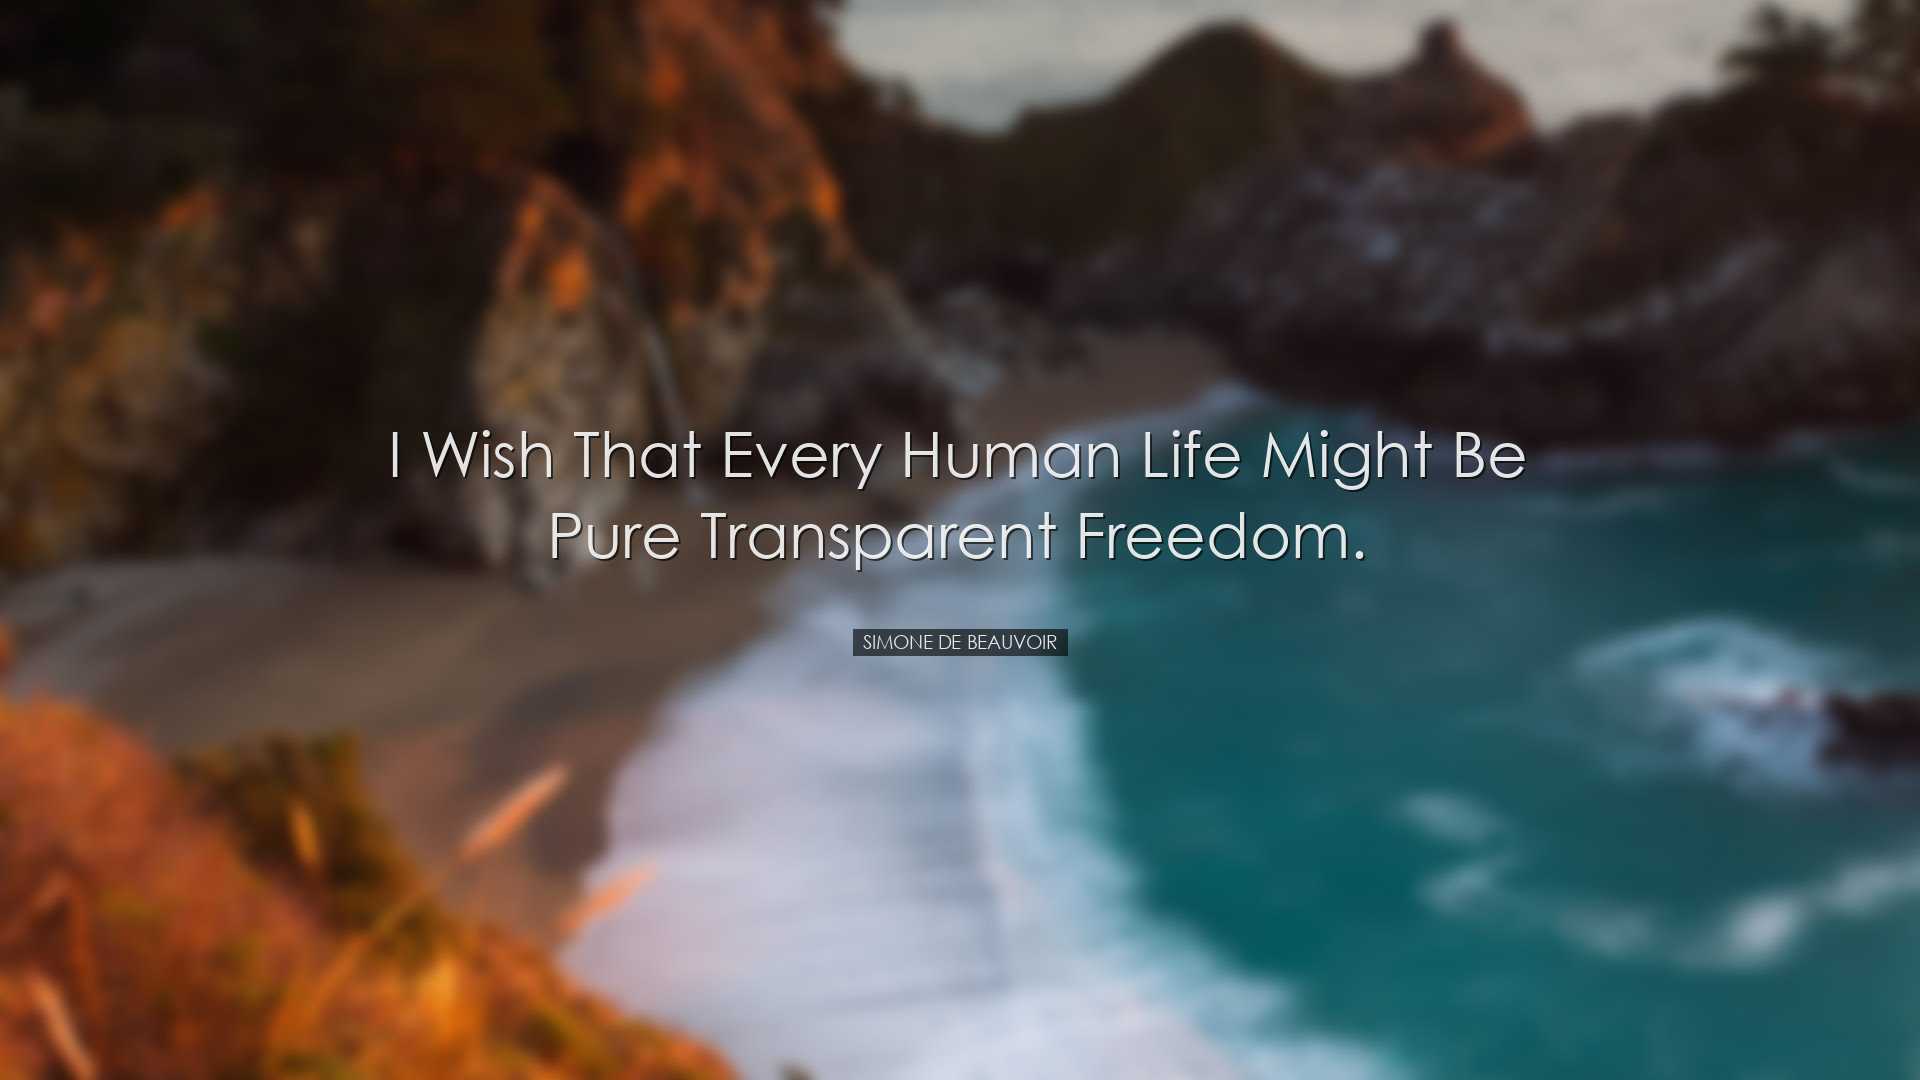 I wish that every human life might be pure transparent freedom. -